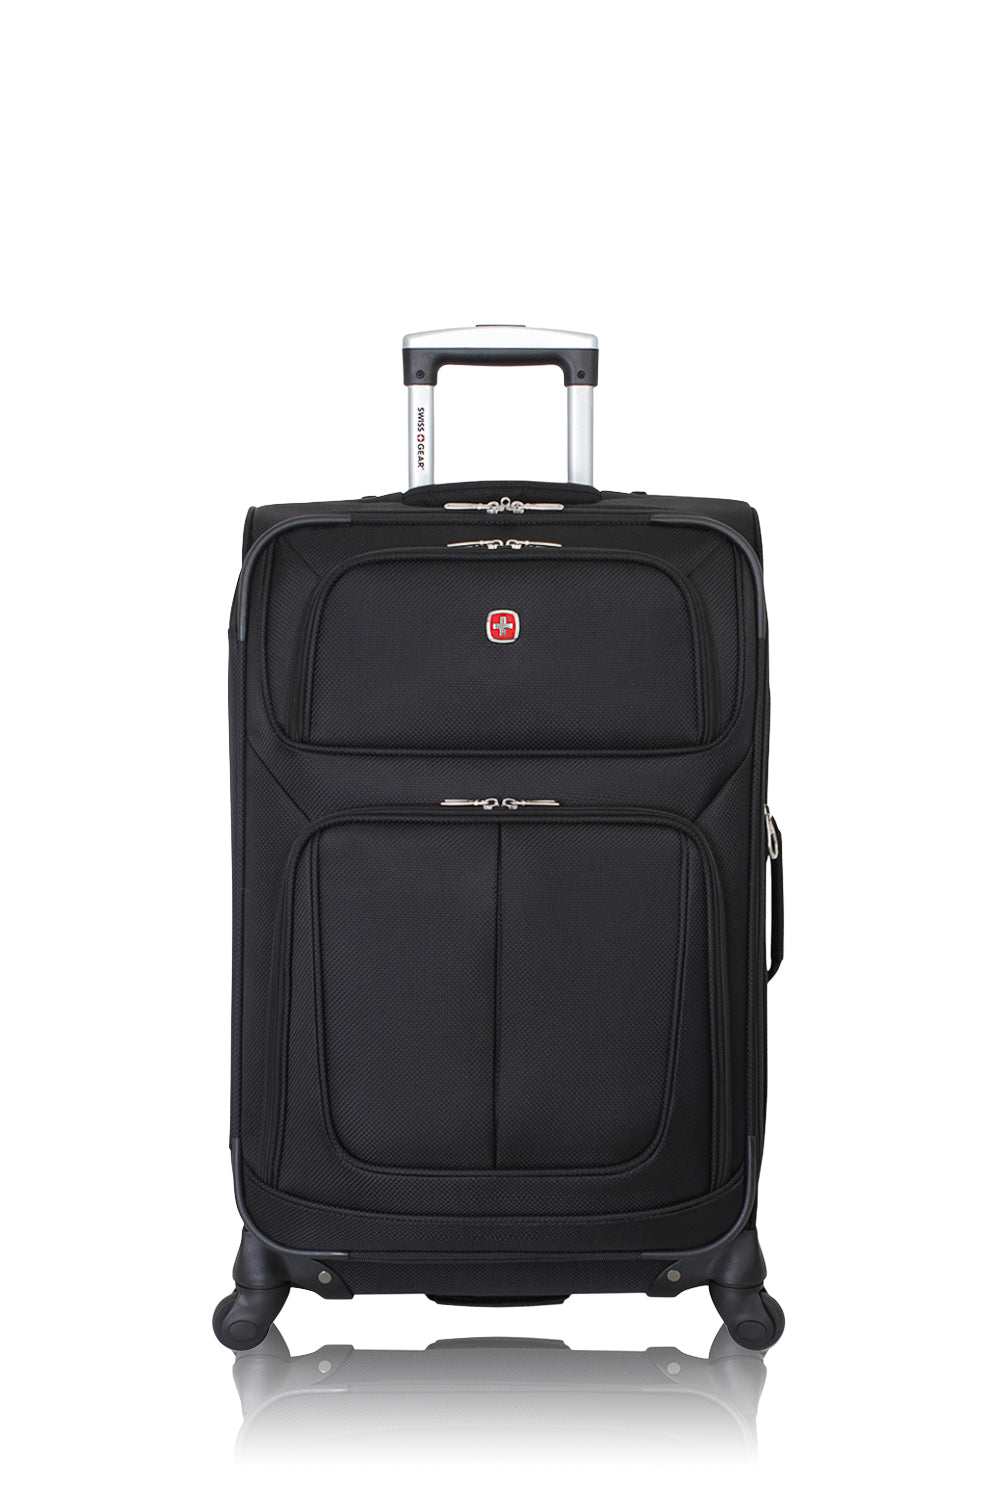 SwissGear 6283 24.5" Expandable Spinner Suitcase